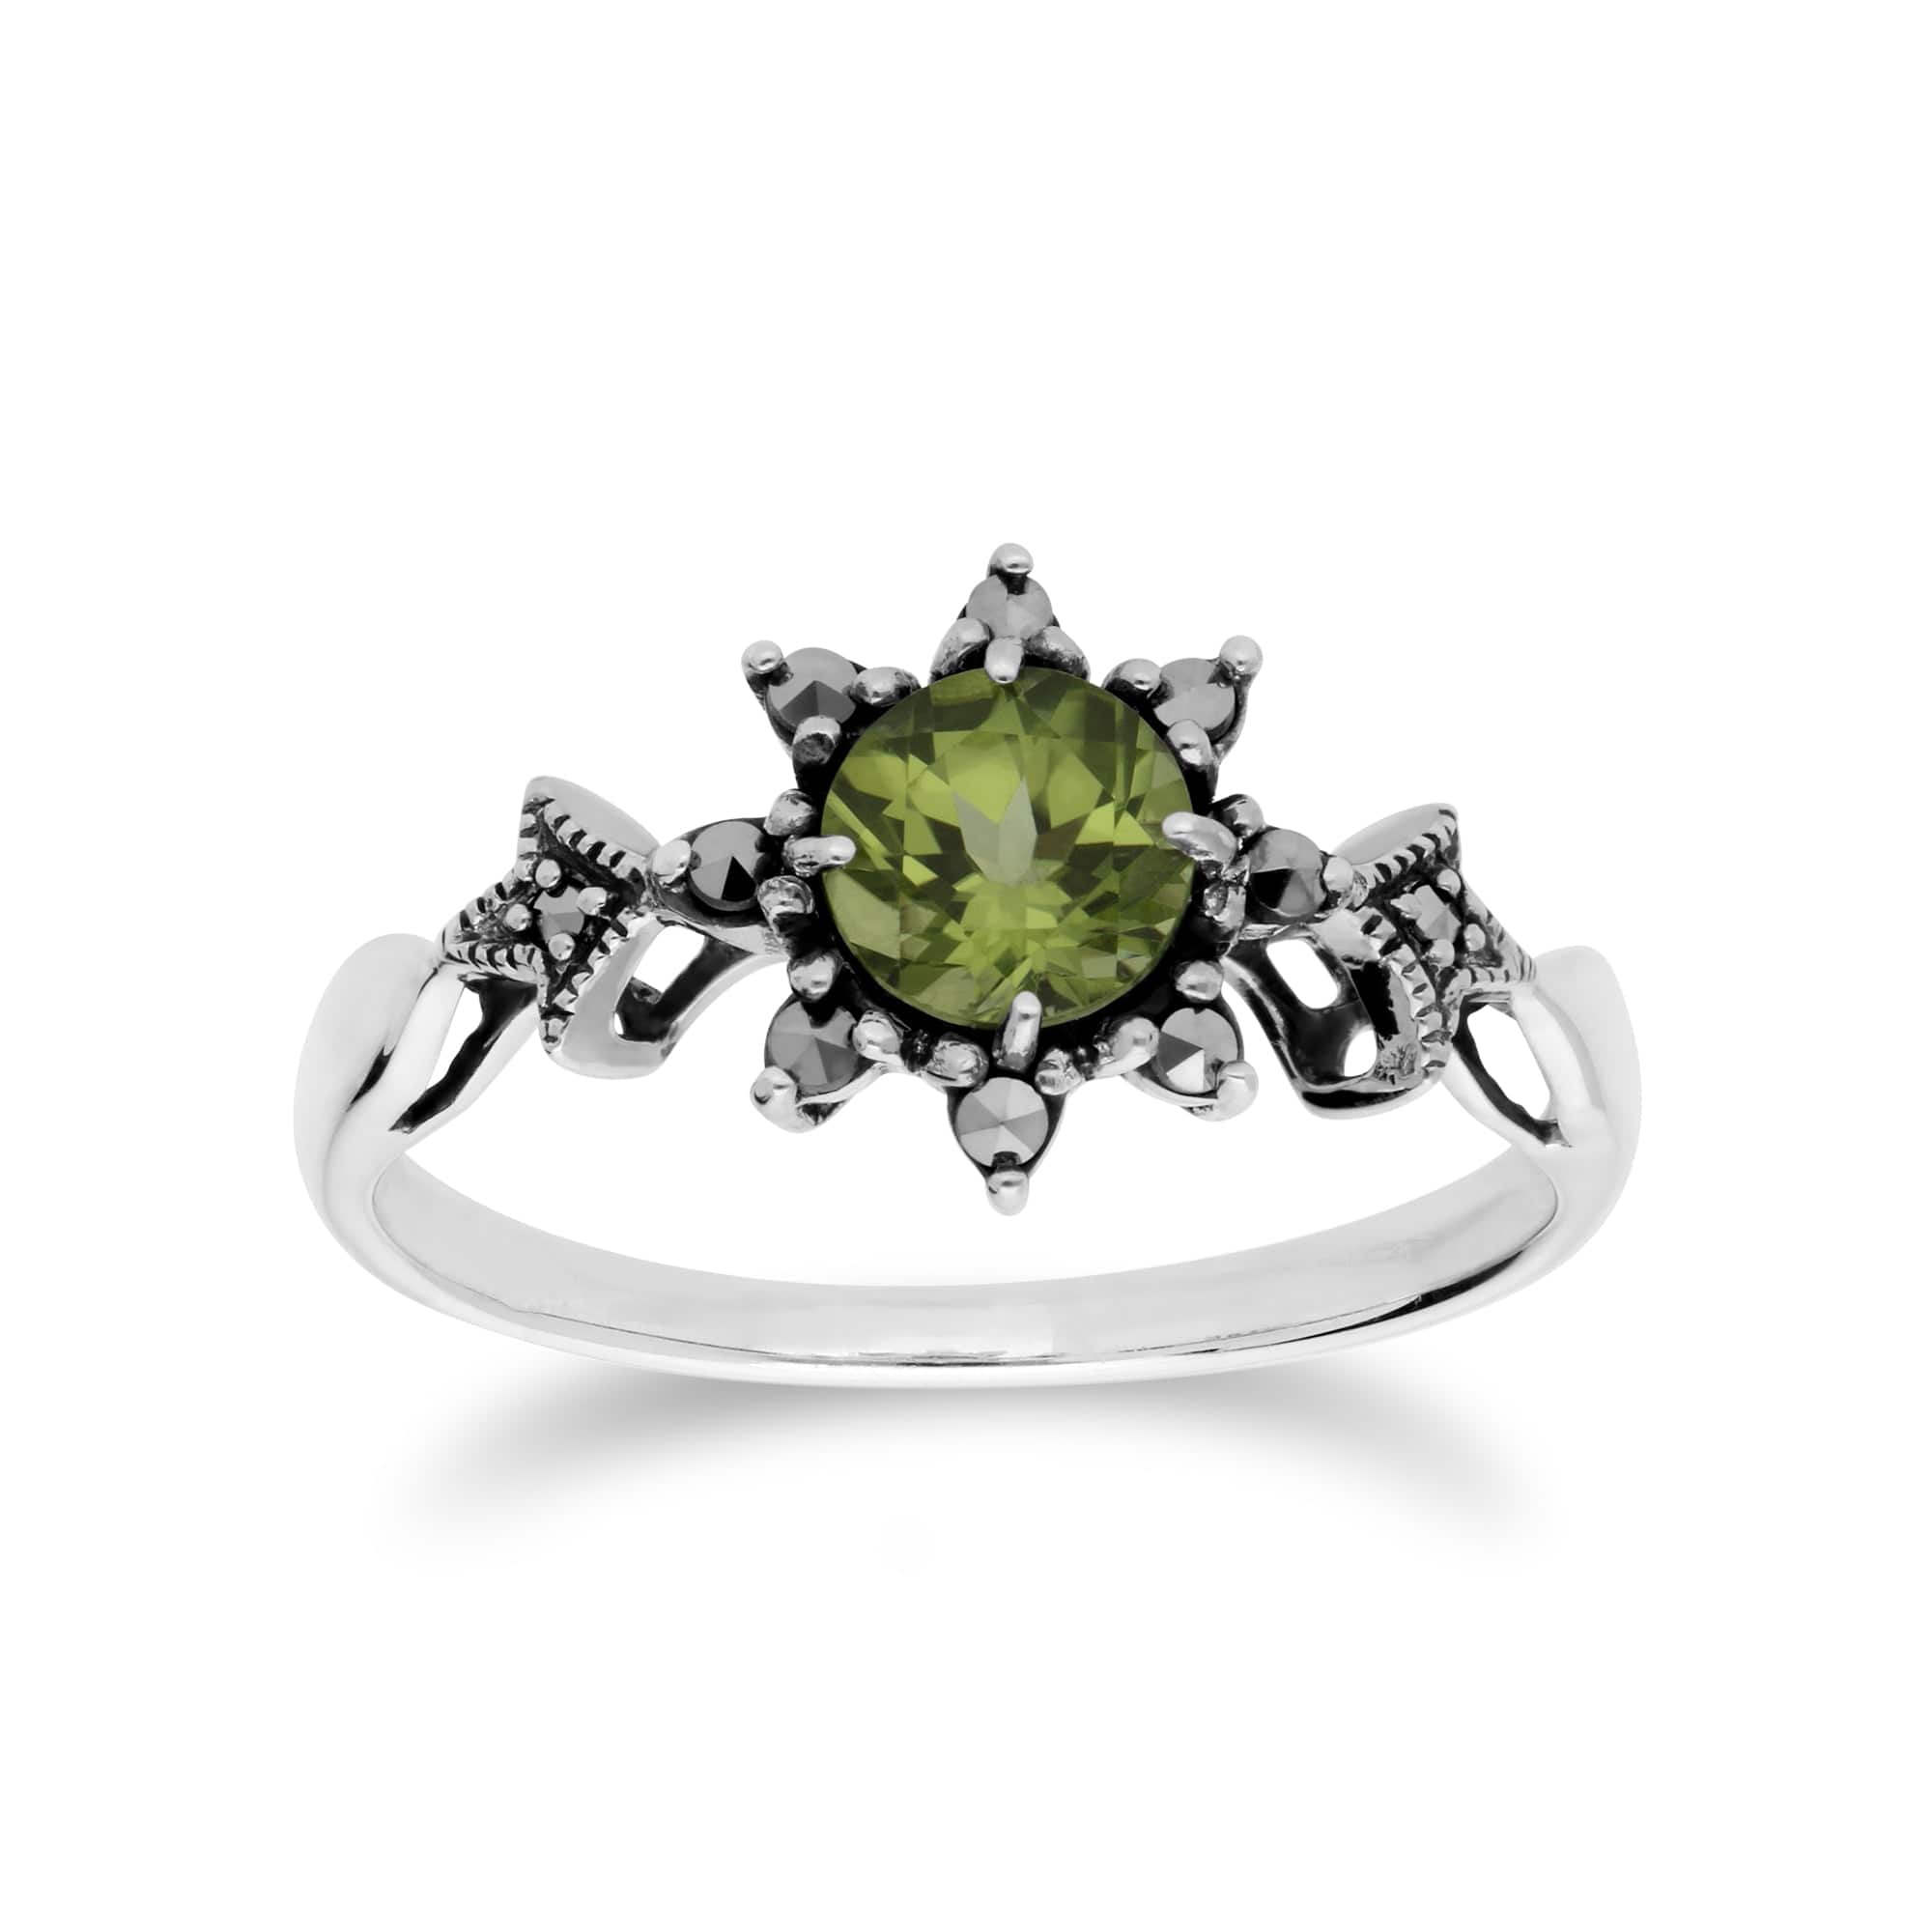 214N696004925-214R599504925 Art Nouveau Style Style Round Peridot & Marcasite Starburst Pendant & Ring Set in 925 Sterling Silver 3